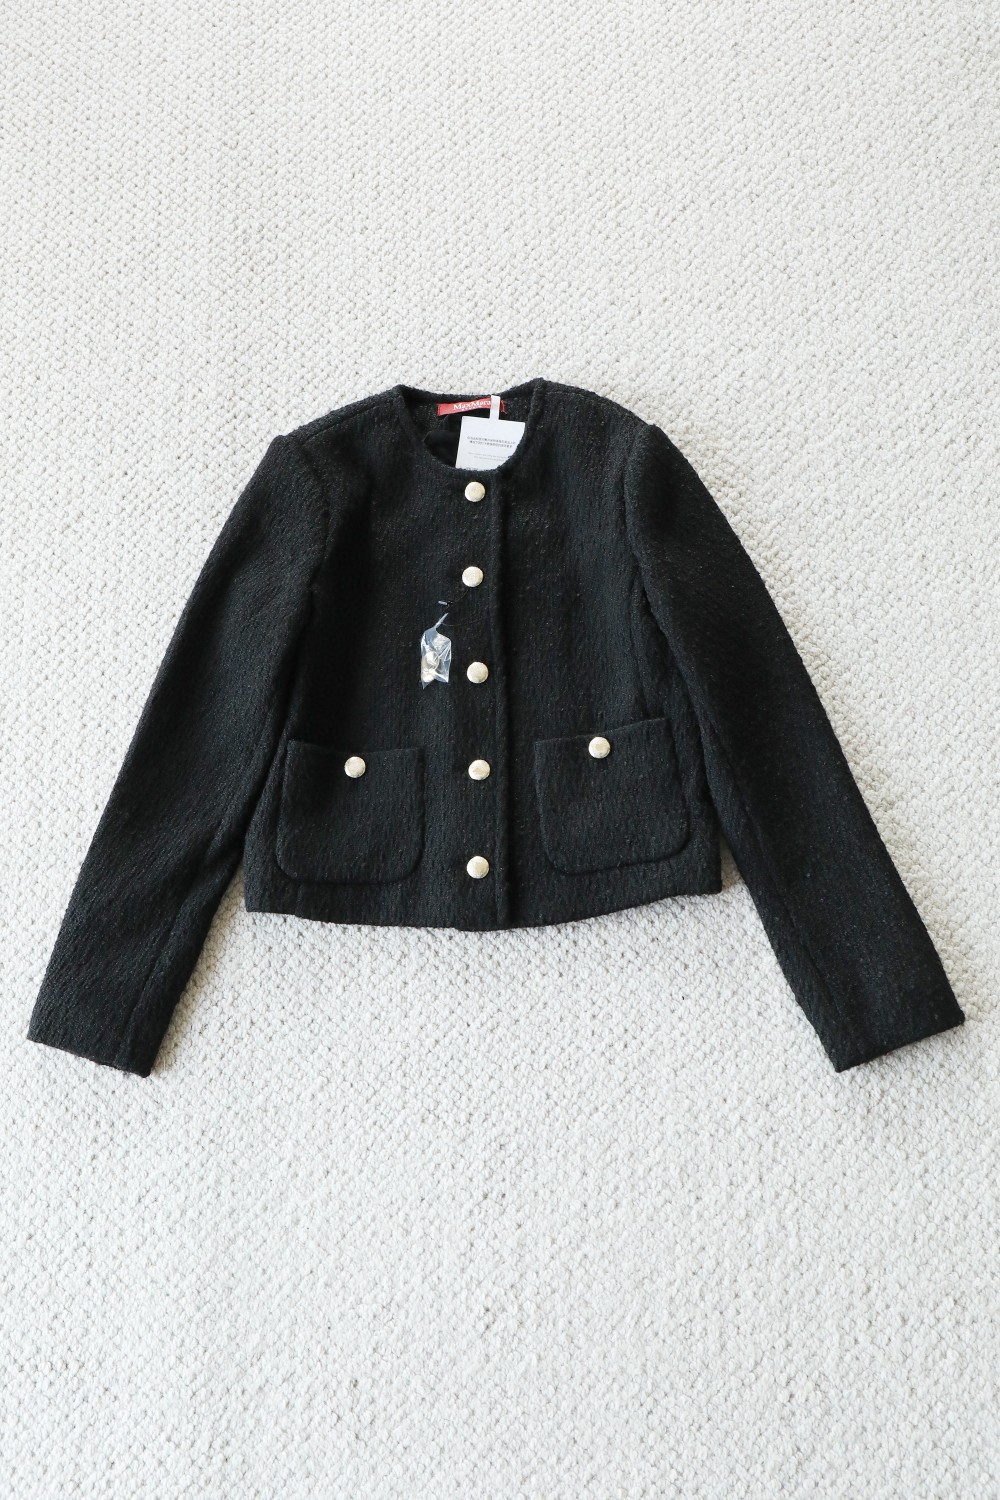 Chanel Clothing Coats & Jackets Weave Cotton Vintage